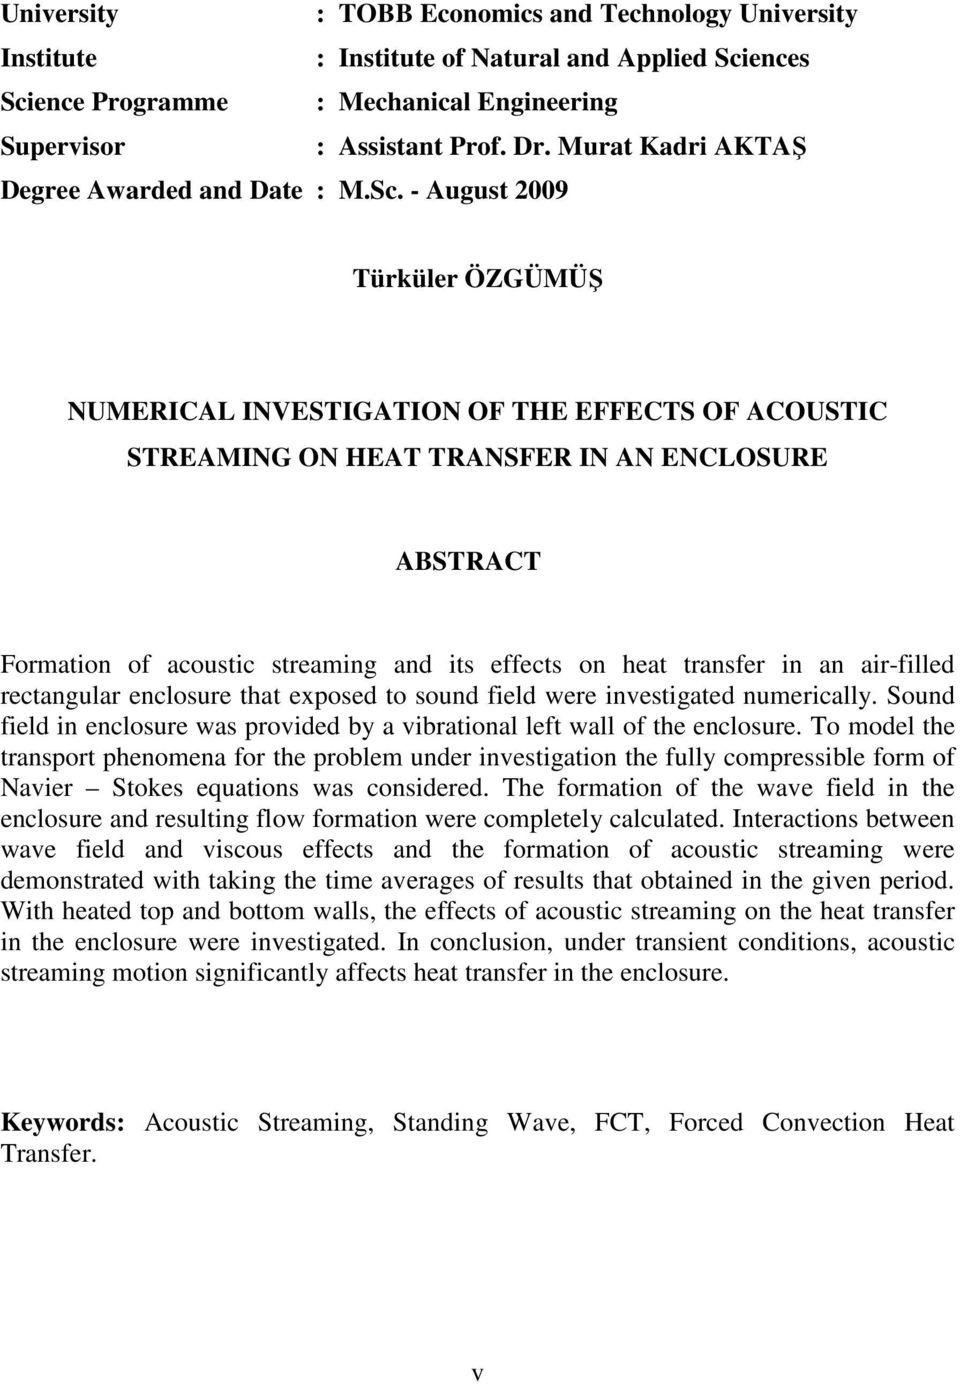 - August 9 Türküler ÖZGÜMÜŞ NUMERICAL INVESTIGATION OF THE EFFECTS OF ACOUSTIC STREAMING ON HEAT TRANSFER IN AN ENCLOSURE ABSTRACT Formation of acoustic streaming and its effects on heat transfer in